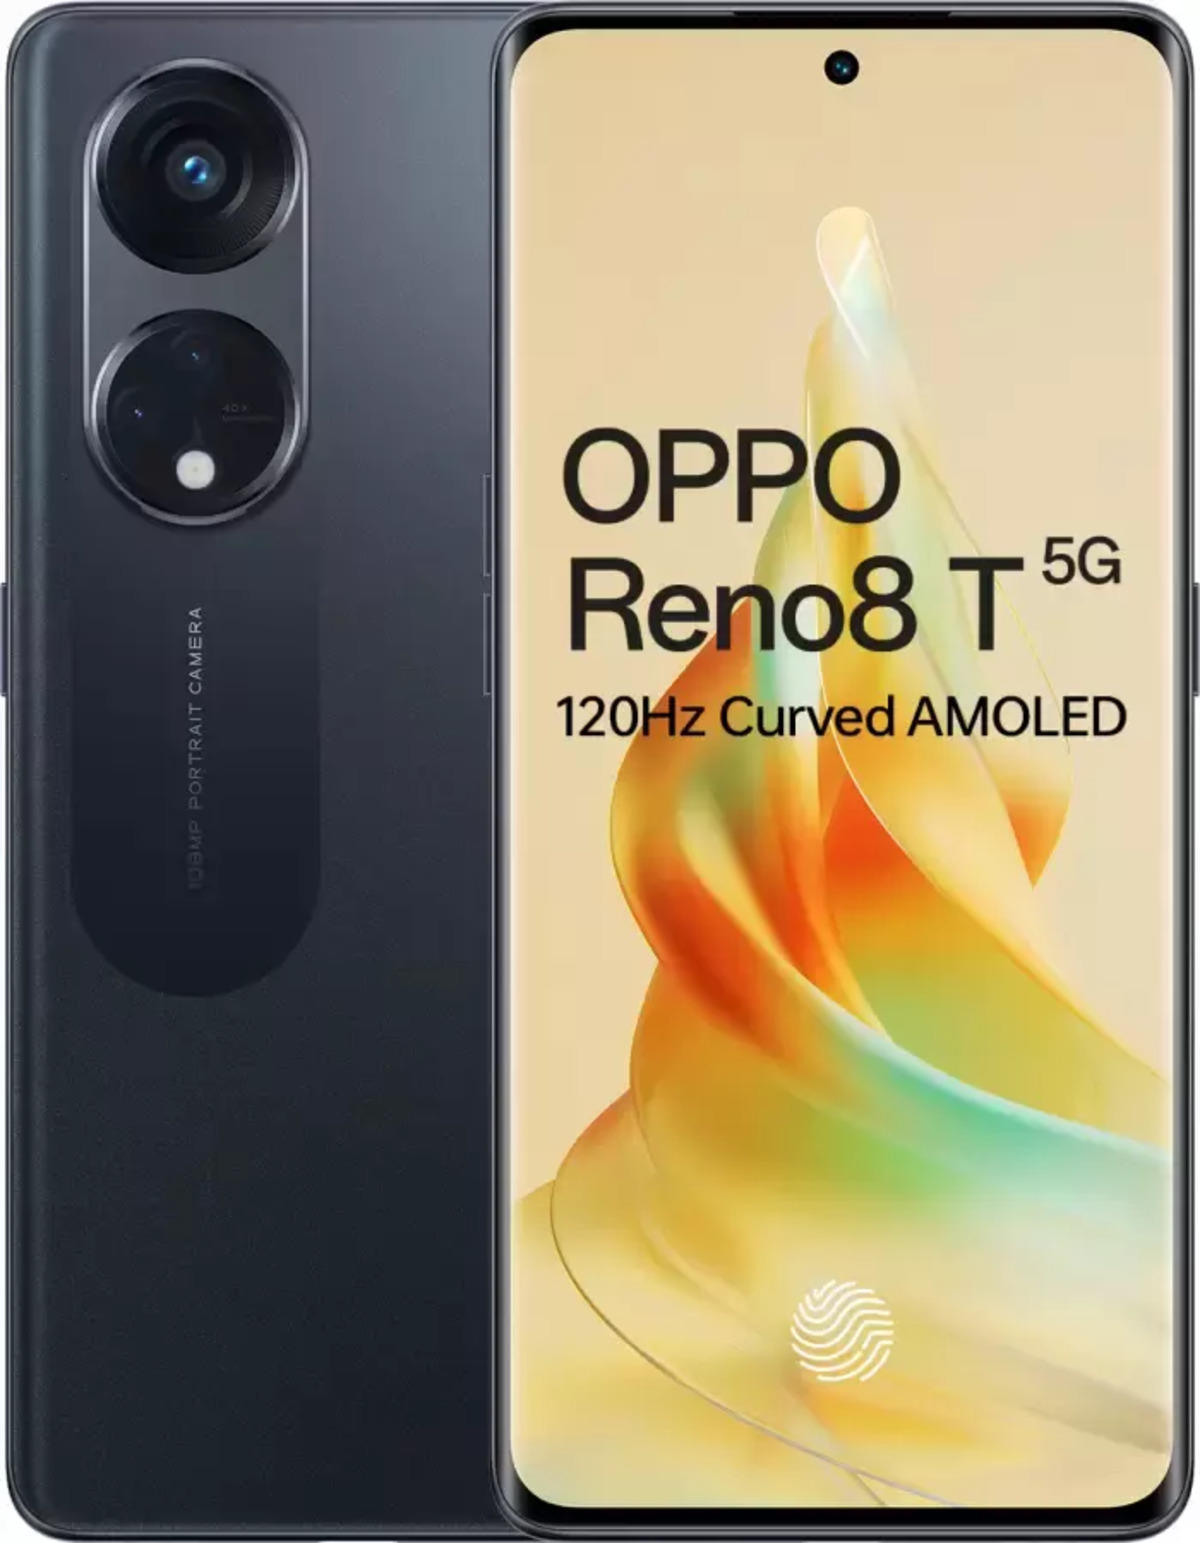 OPPO Reno8 T Price in India, Full Specifications (8th Feb 2023) at Gadgets  Now